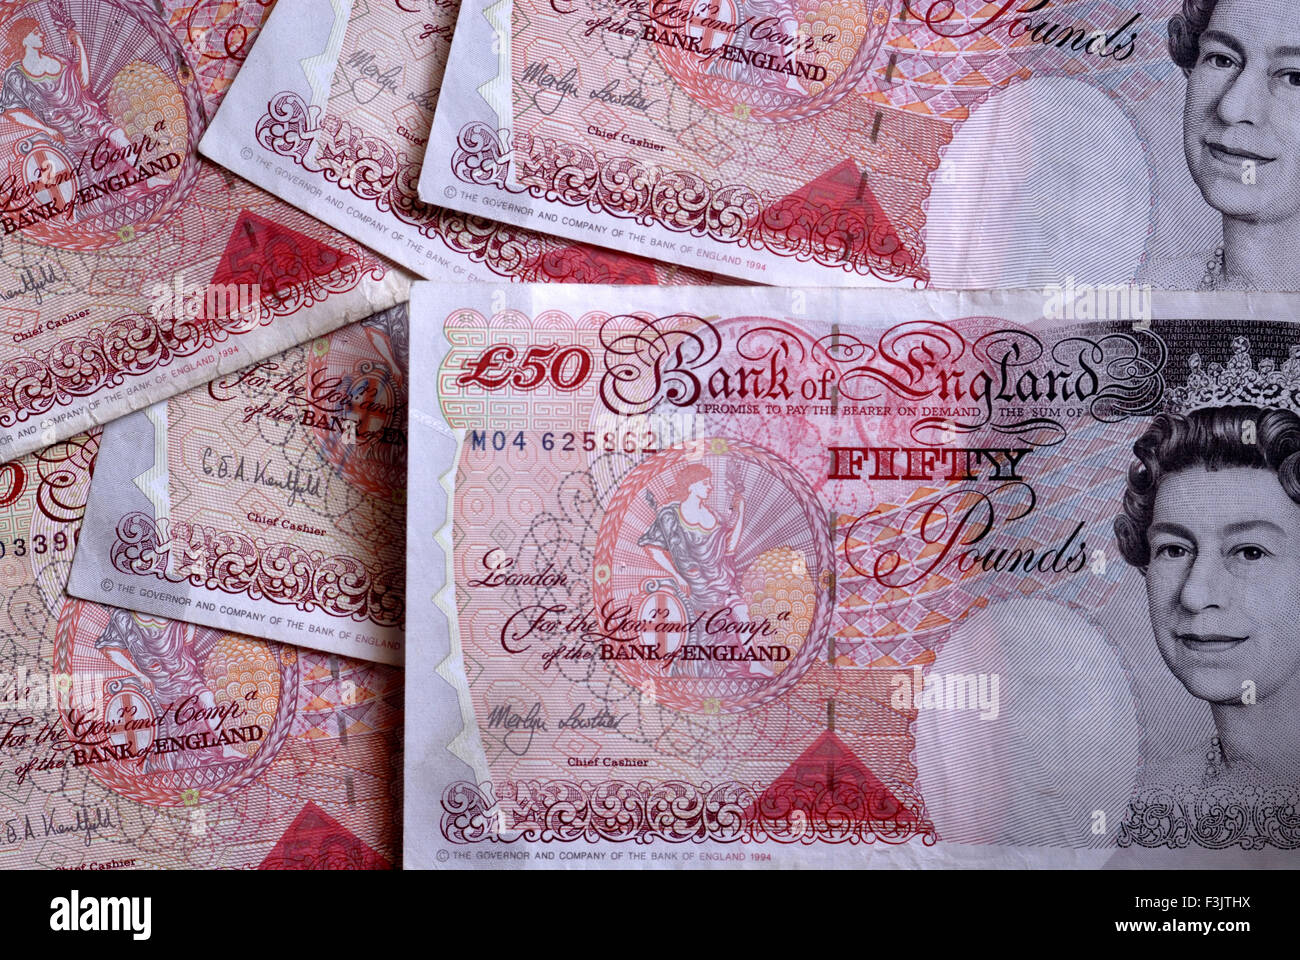 Fifty Pounds notes of Bank of England ; Currency of a country England Stock Photo